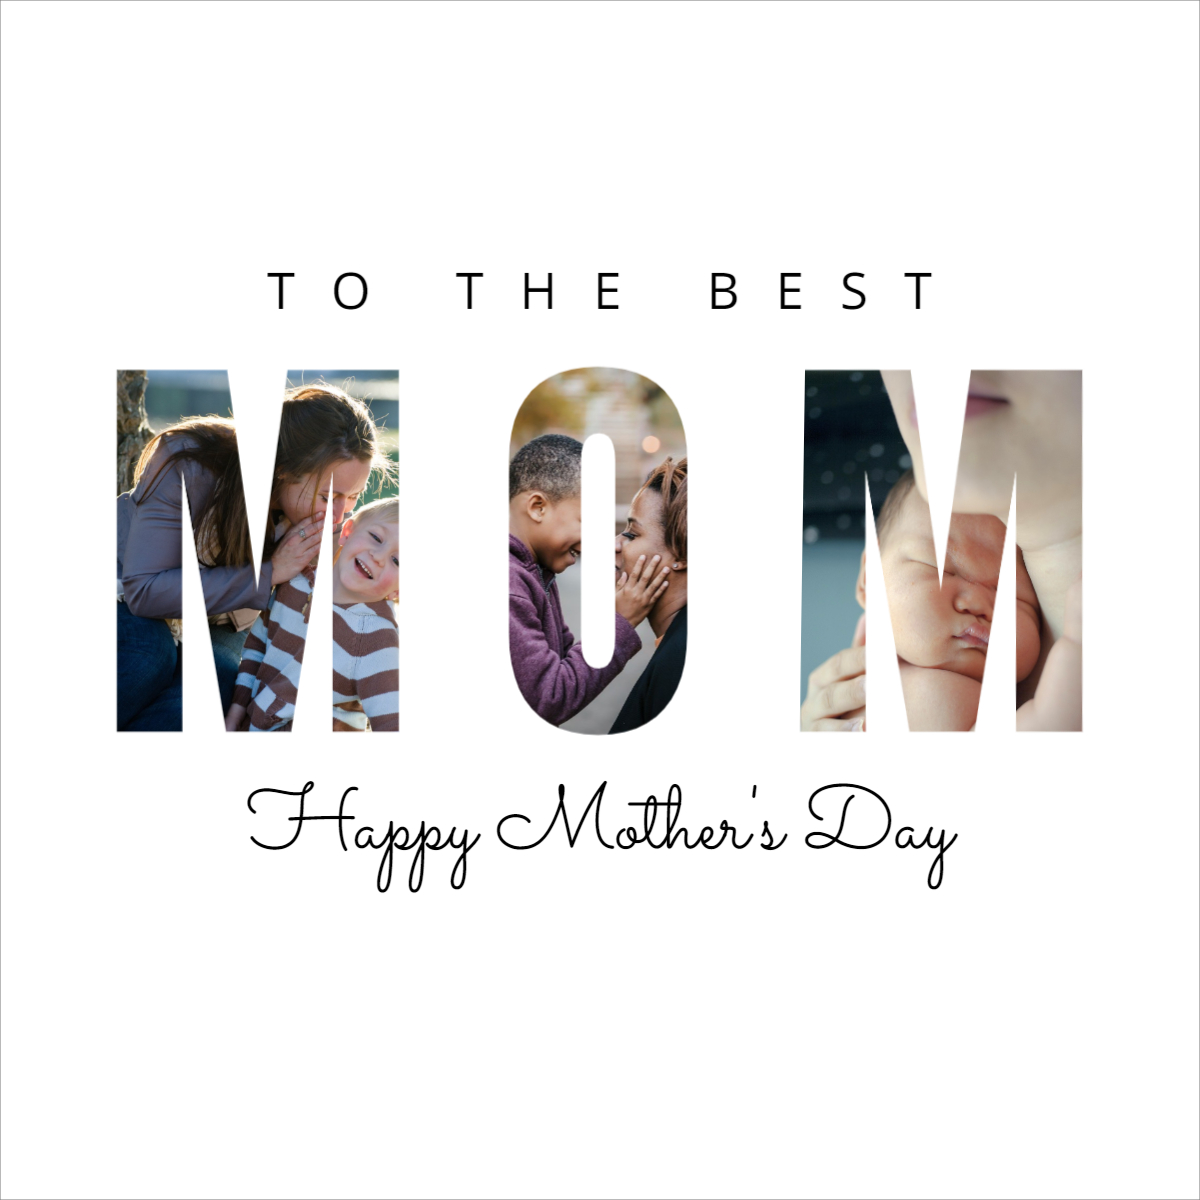 Happy Mother's Day Wishes Greeting With Photo Template